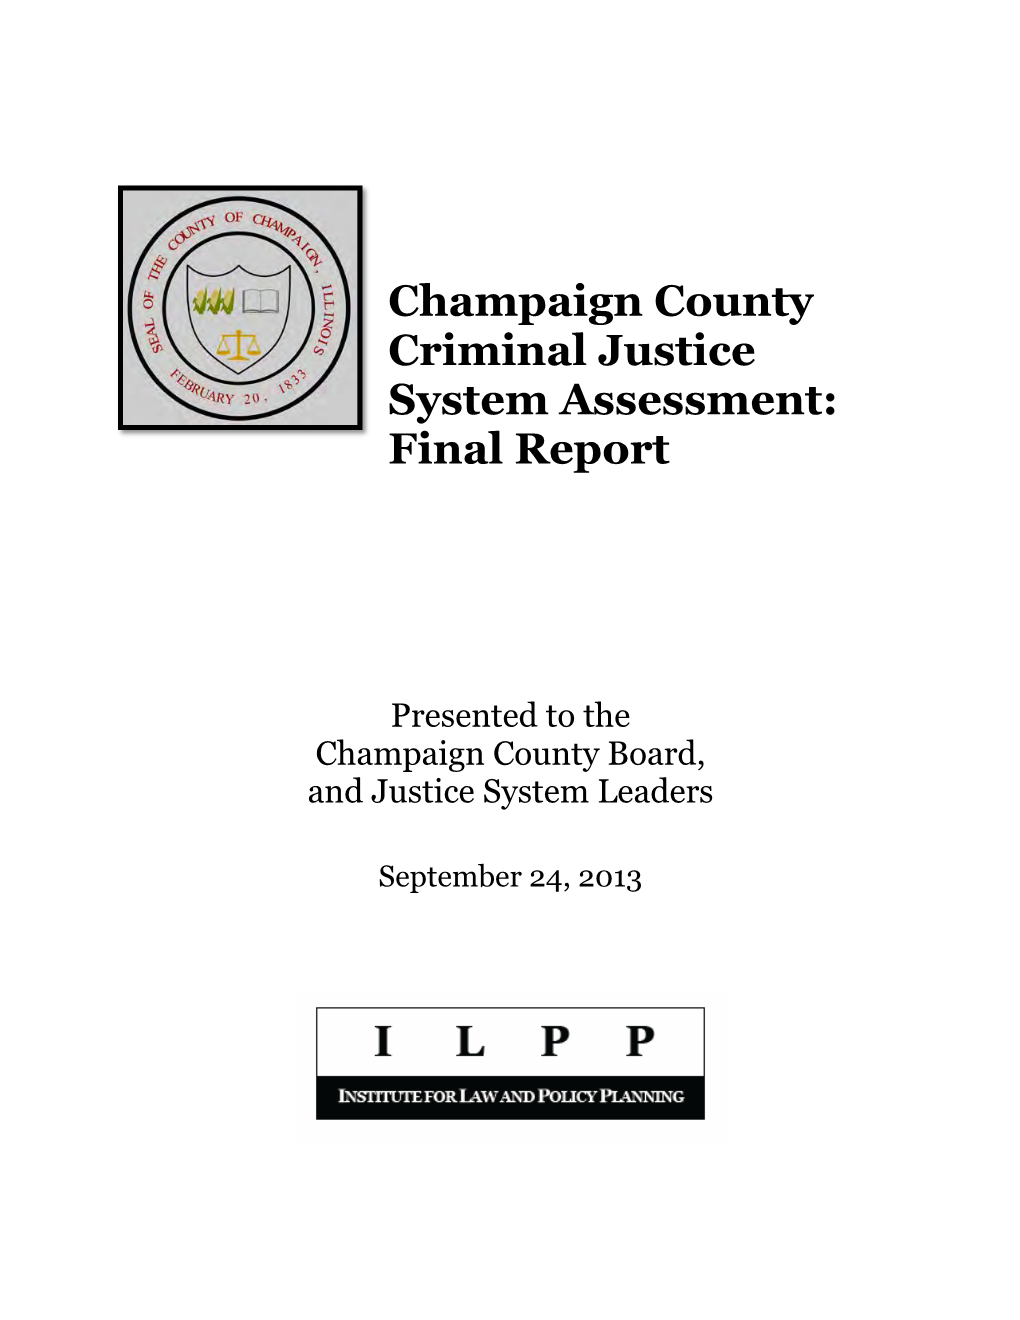 Champaign County Criminal Justice System Assessment: Final Report